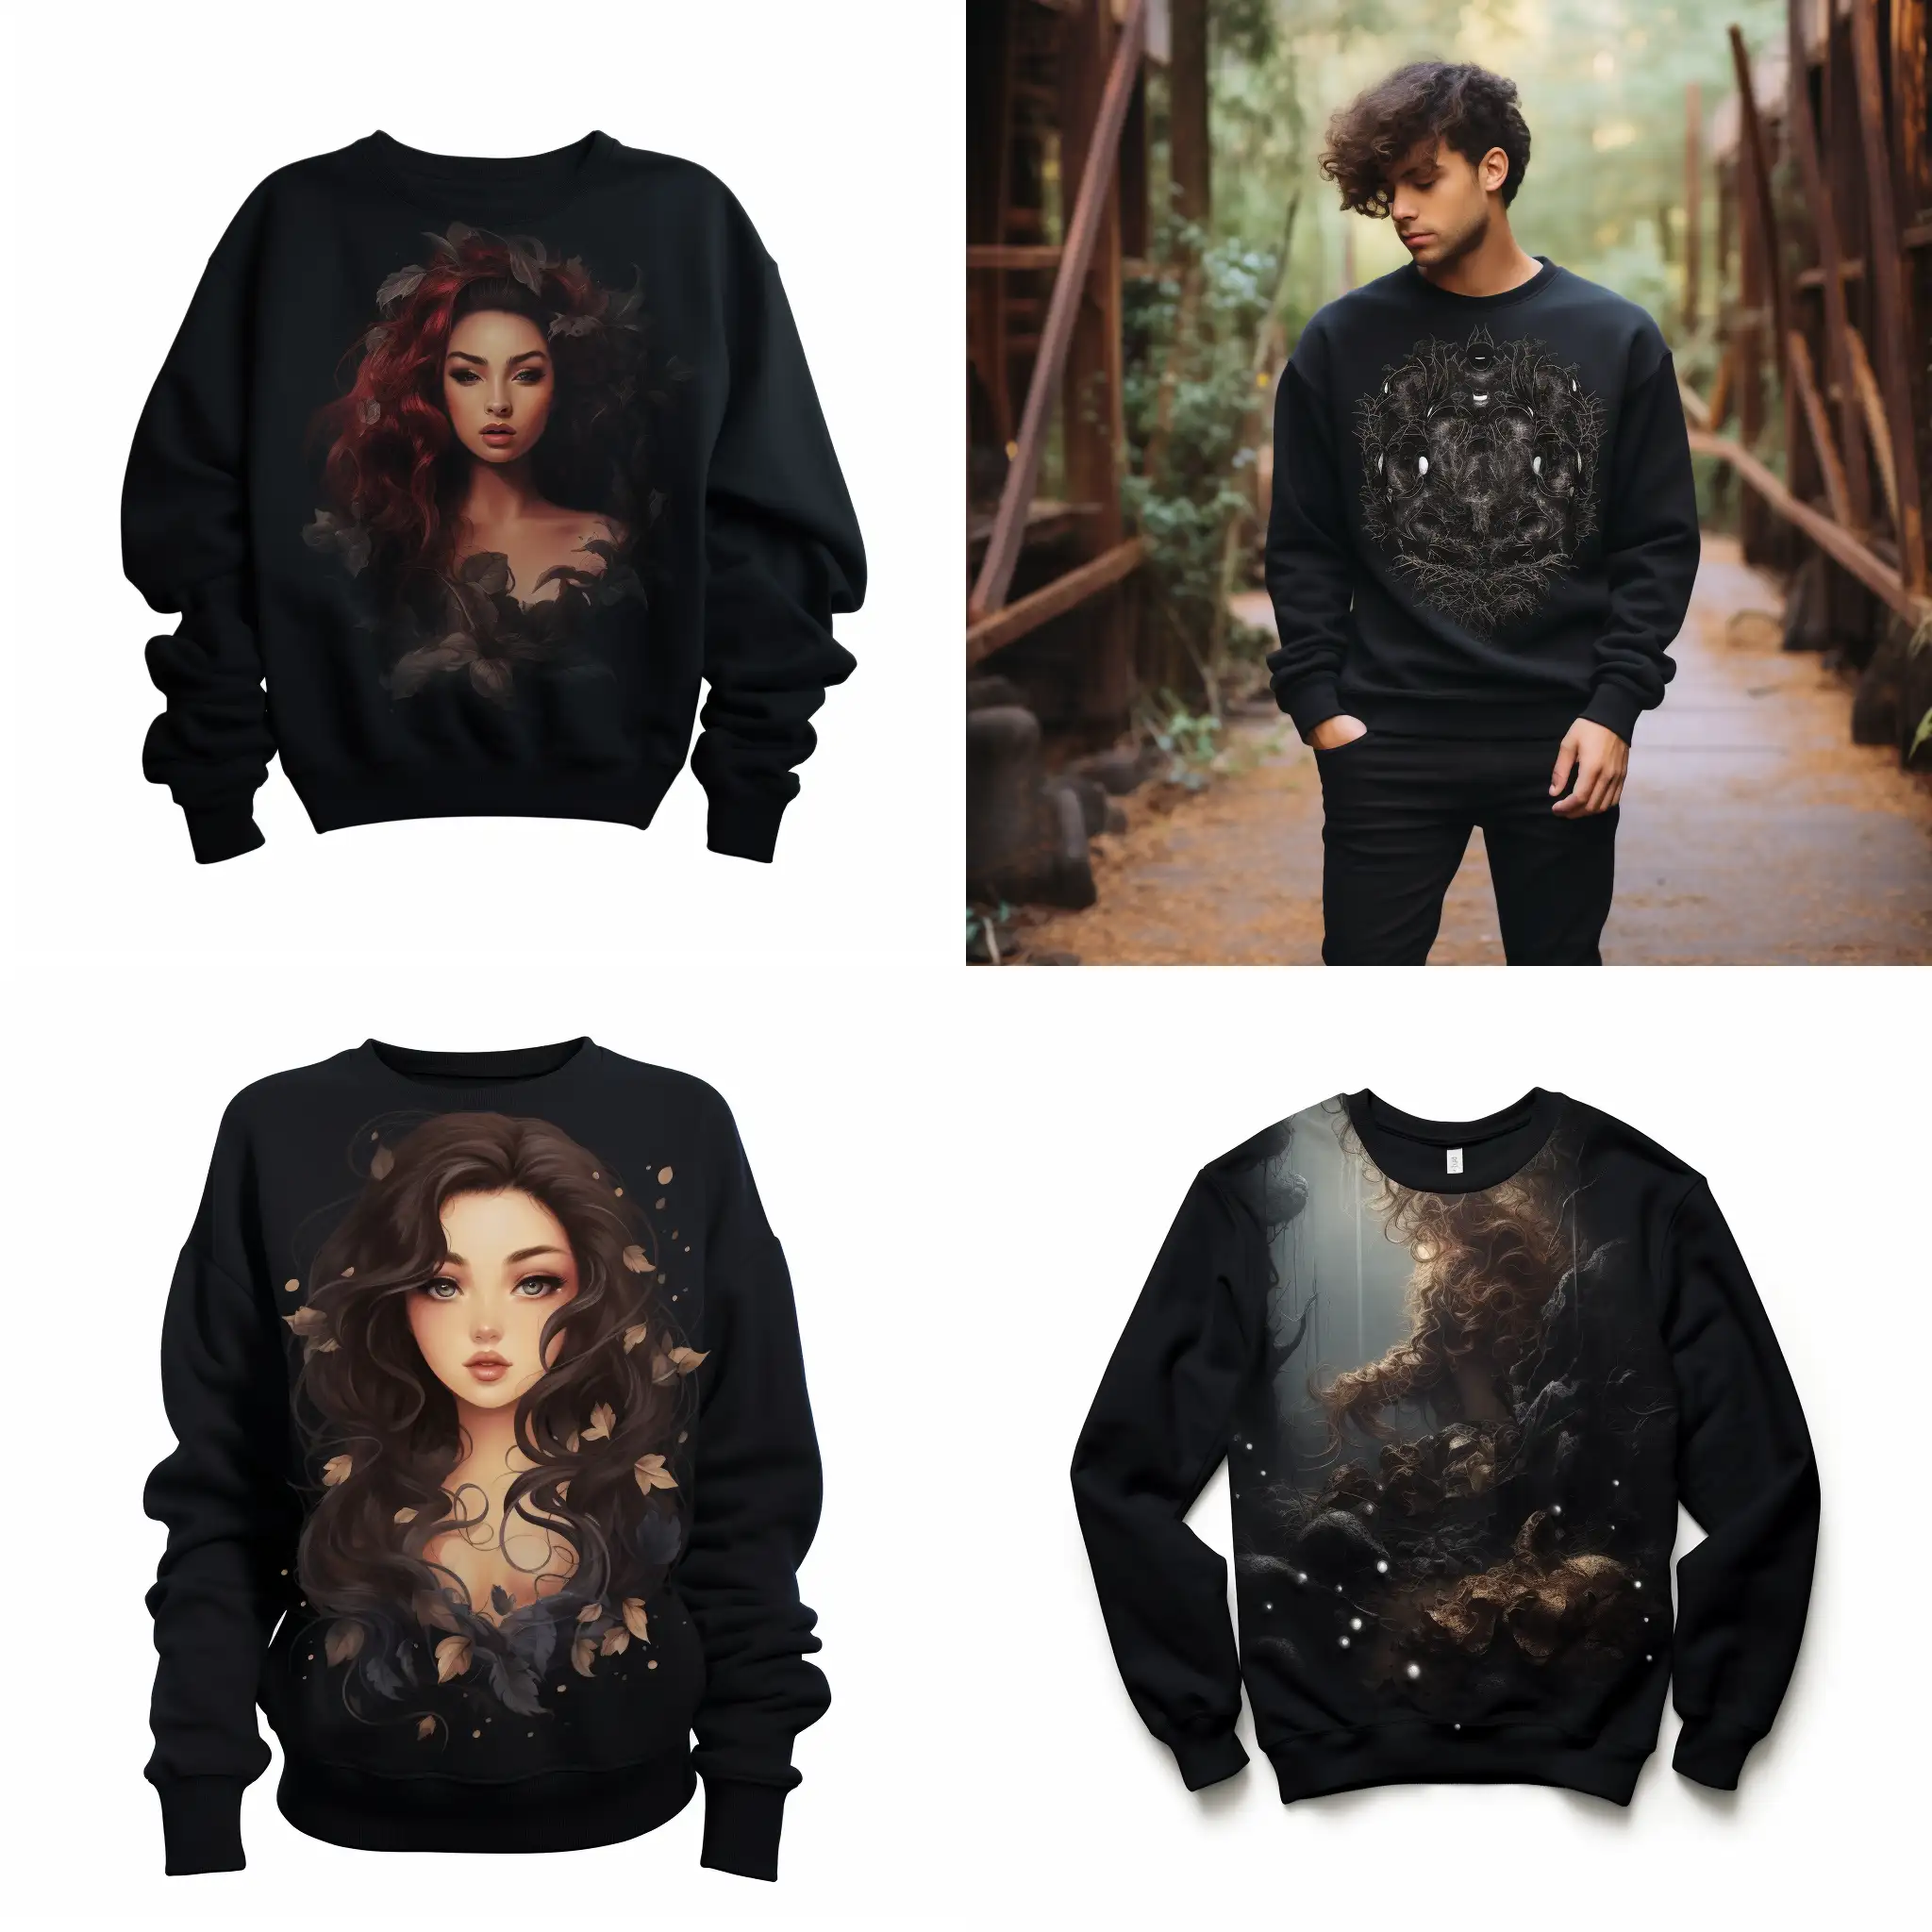 Cozy-Black-Sweatshirt-for-a-Stylish-Look-AIGenerated-Image